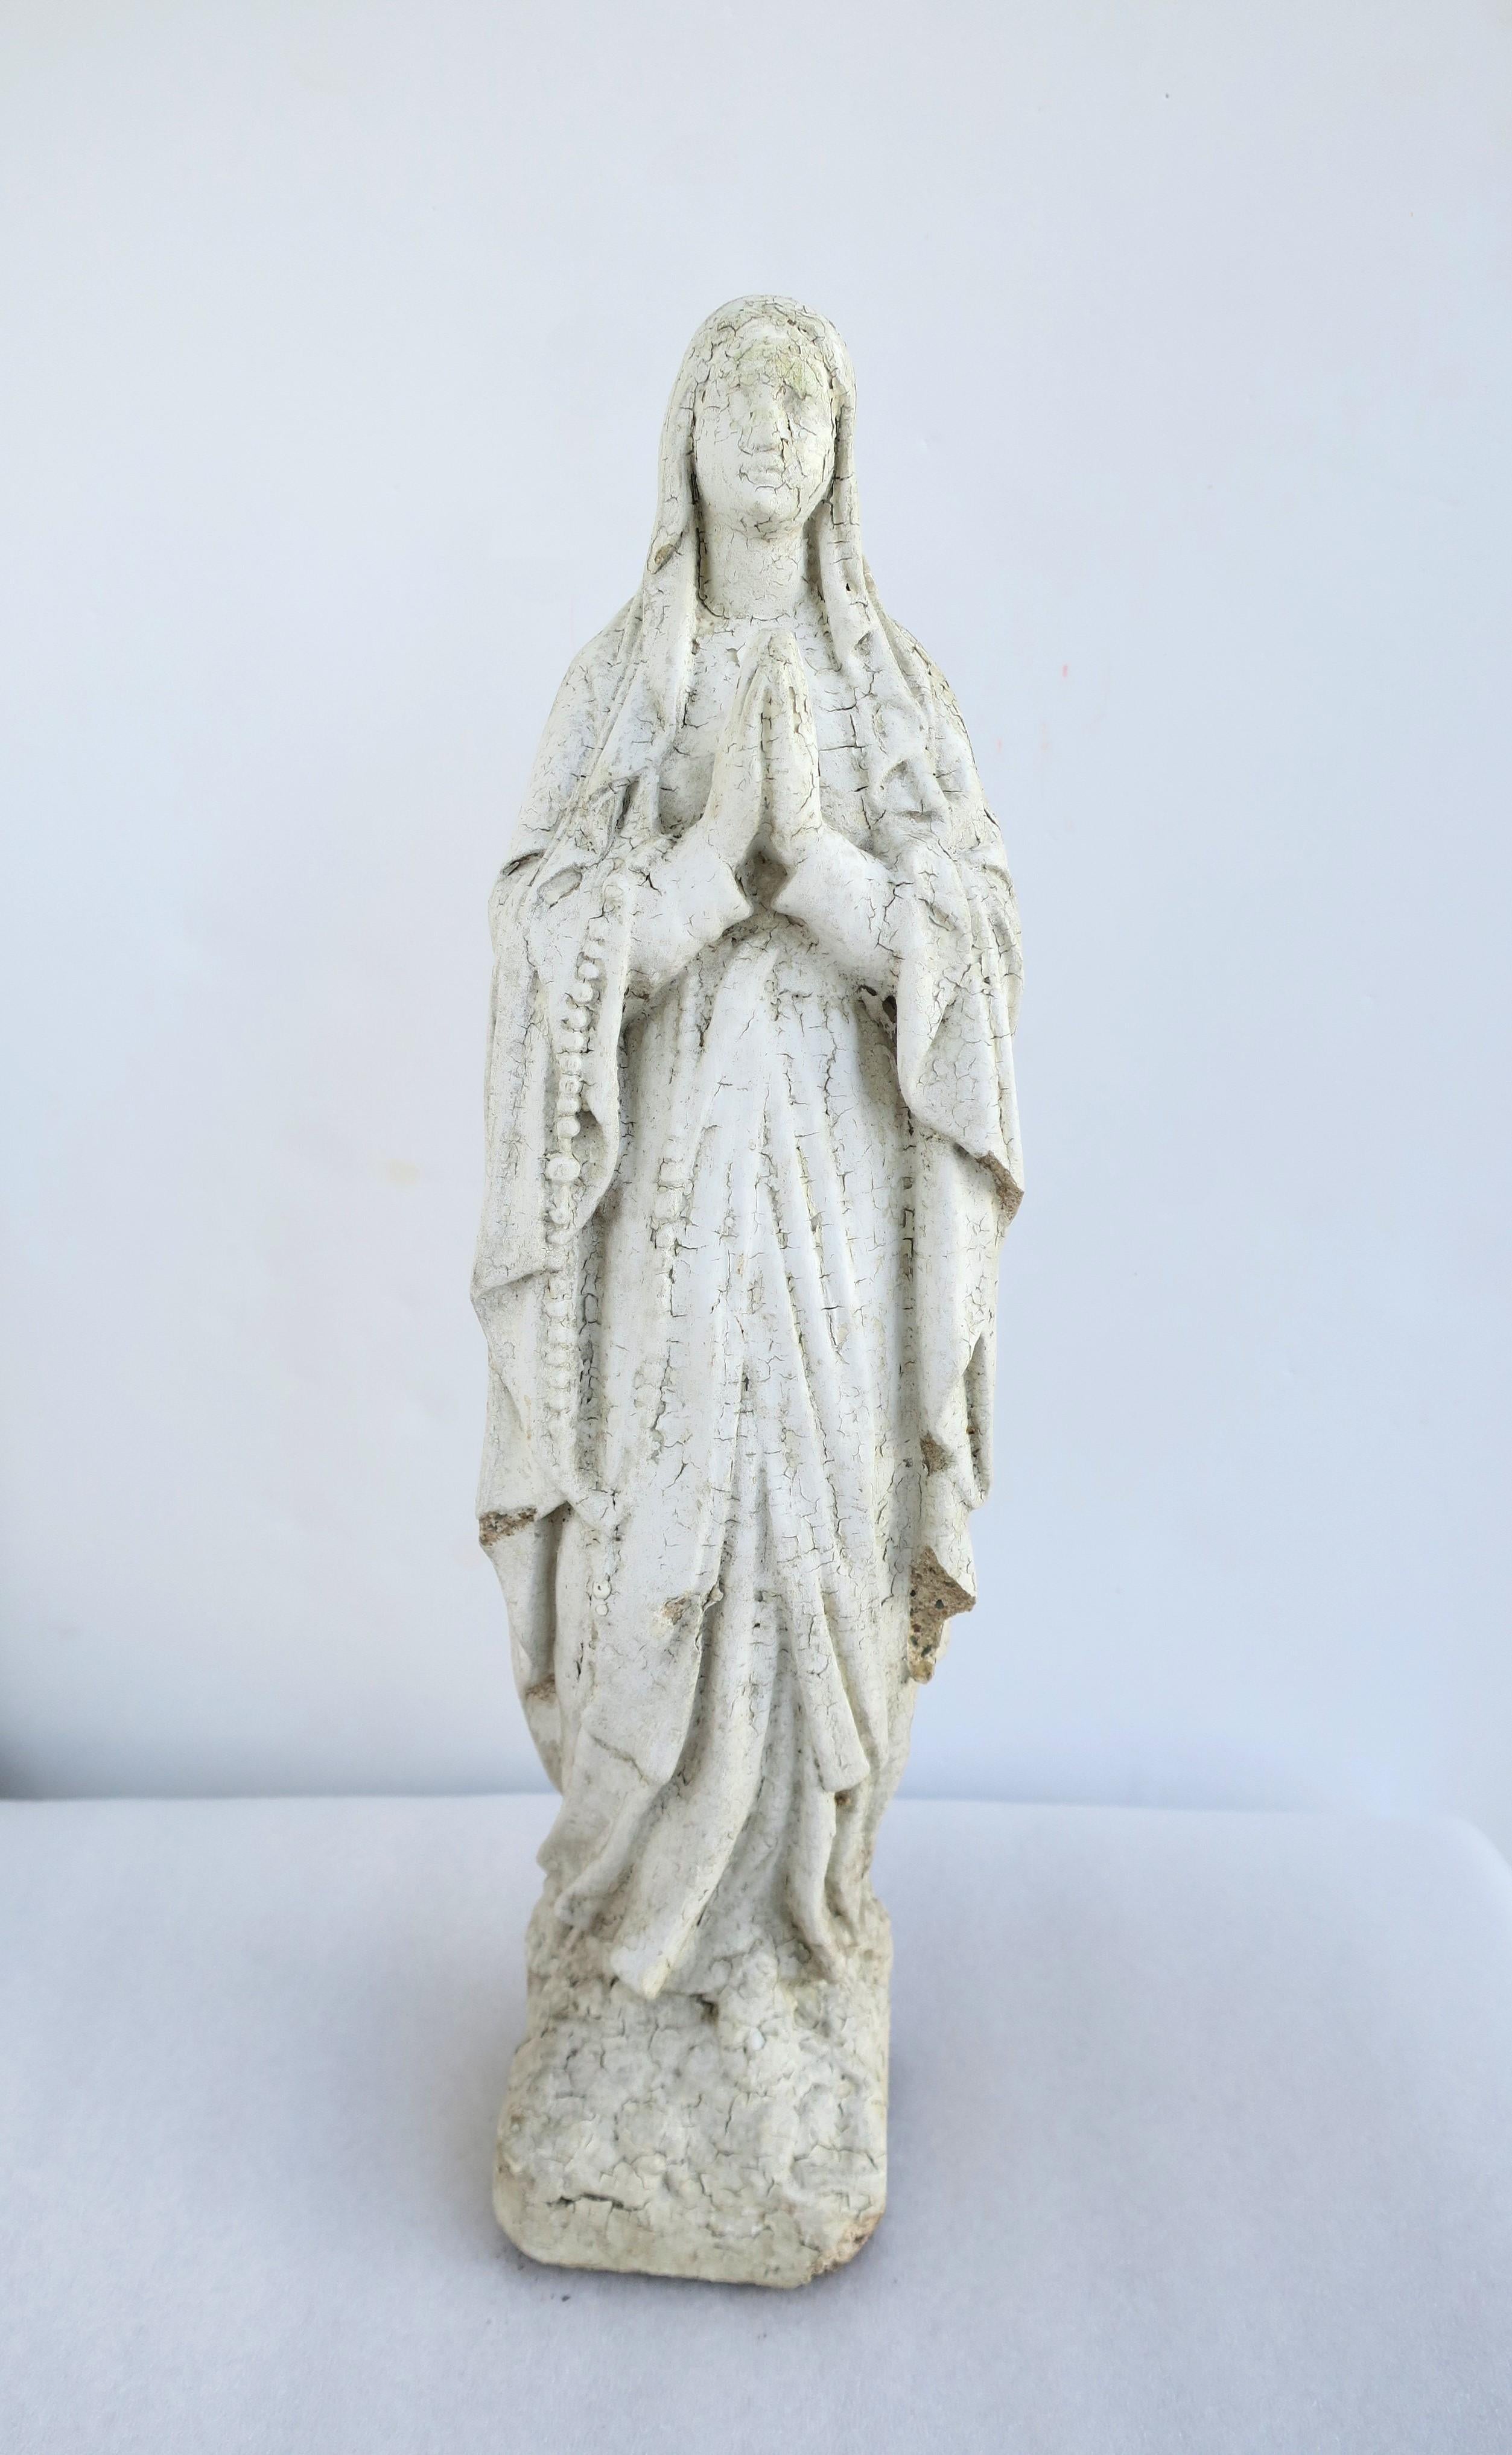 A 'Virgin Mary', 'Madonna', or 'Blessed Mother' white painted cement sculpture garden statue, circa early to mid-20th century. Statue can be used indoors or out. Dimensions: 3.63